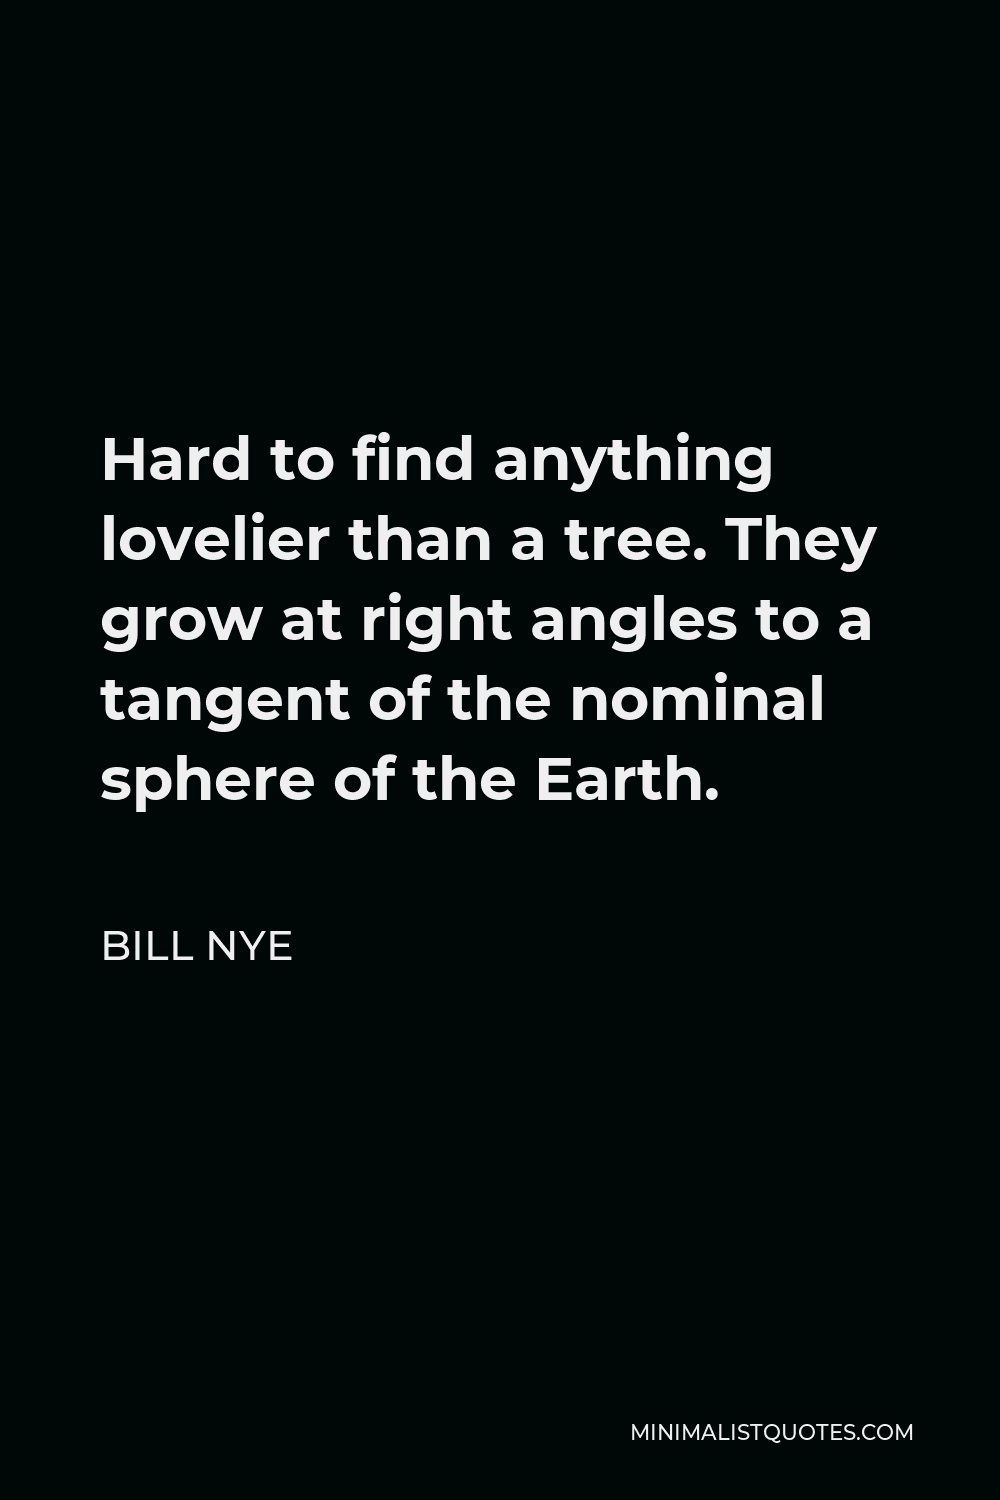 Bill Nye Quote - Hard to find anything lovelier than a tree. They grow at right angles to a tangent of the nominal sphere of the Earth.